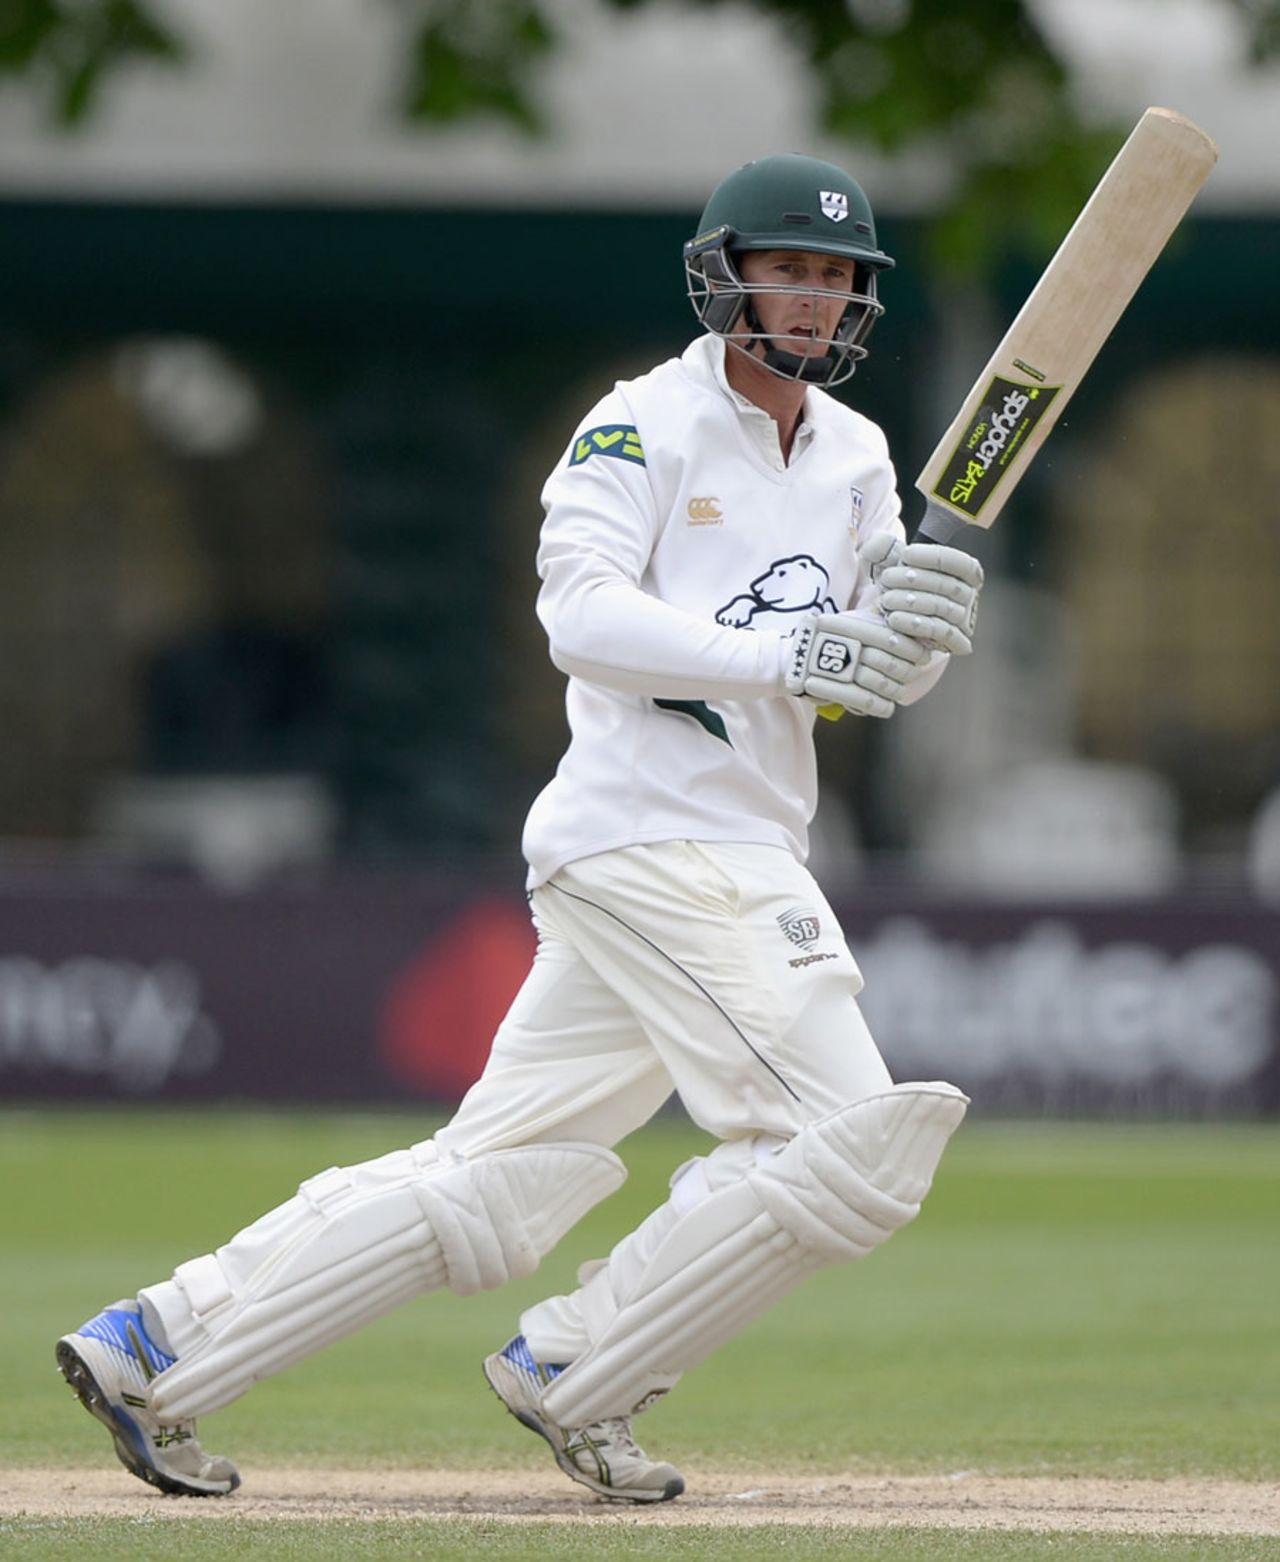 Richard Oliver got the chase off to a good start with 47 off 34 balls, Worcestershire v New Zealanders, Tour match, New Road, 4th day, May 17, 2015